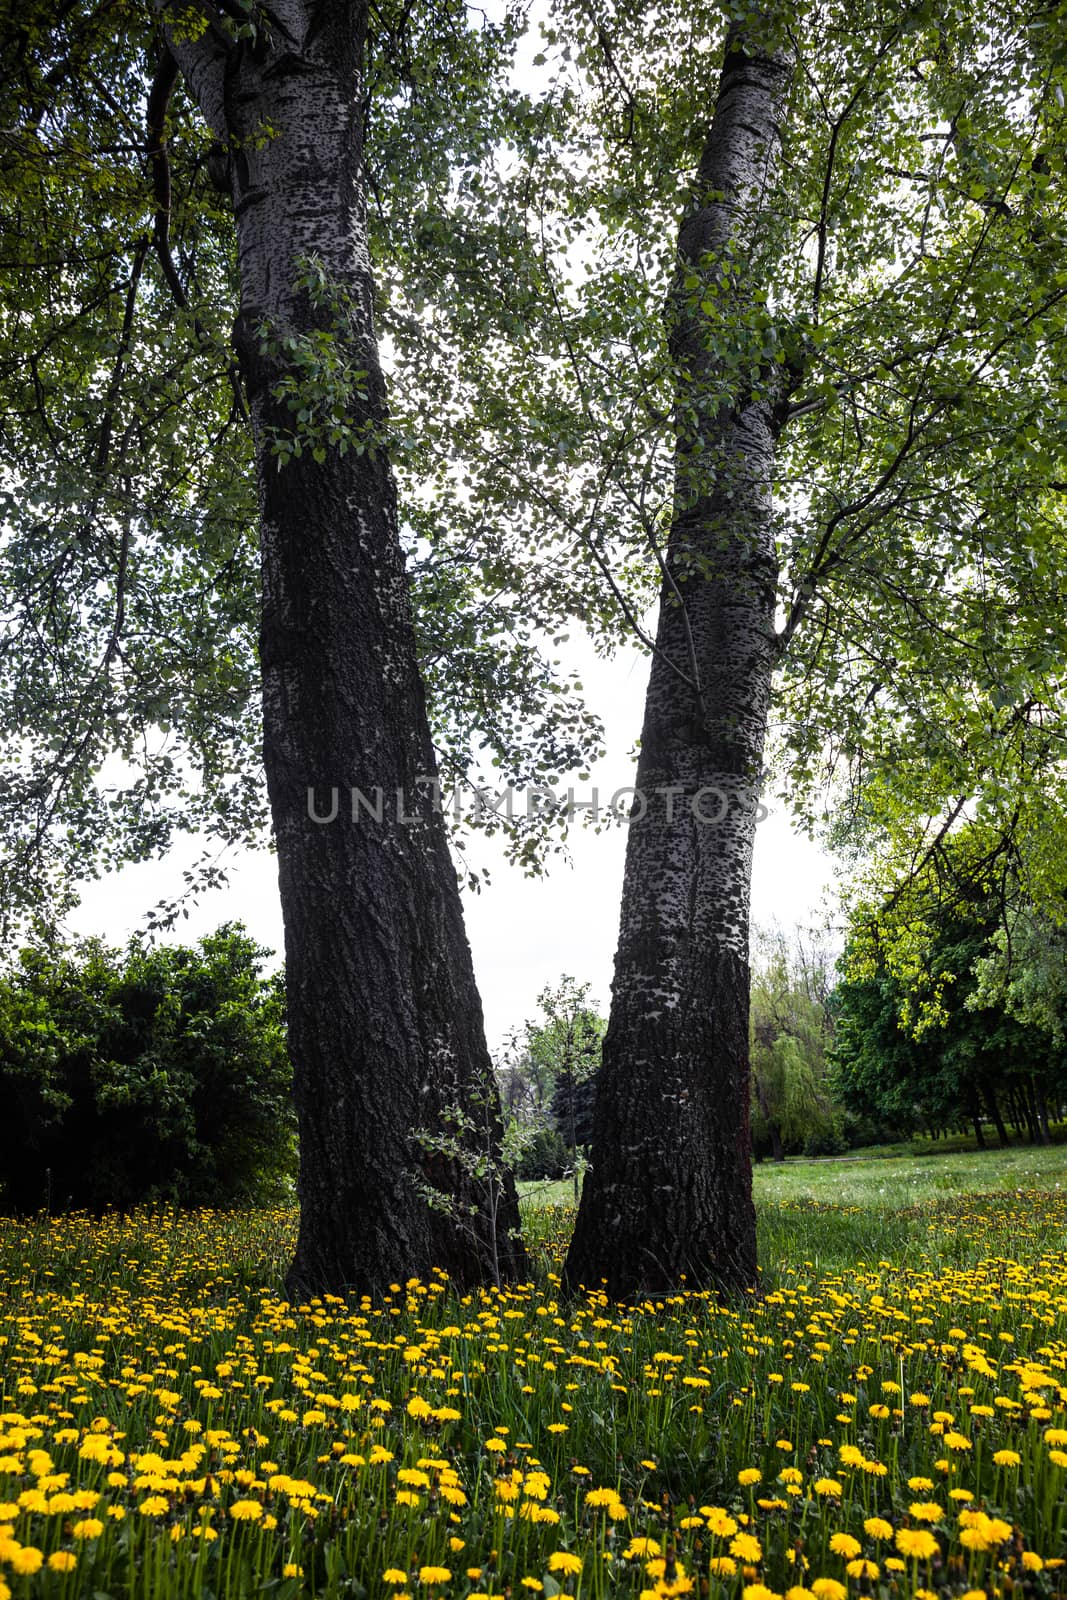 Trunks of trees surrounded by blooming yellow dandelions